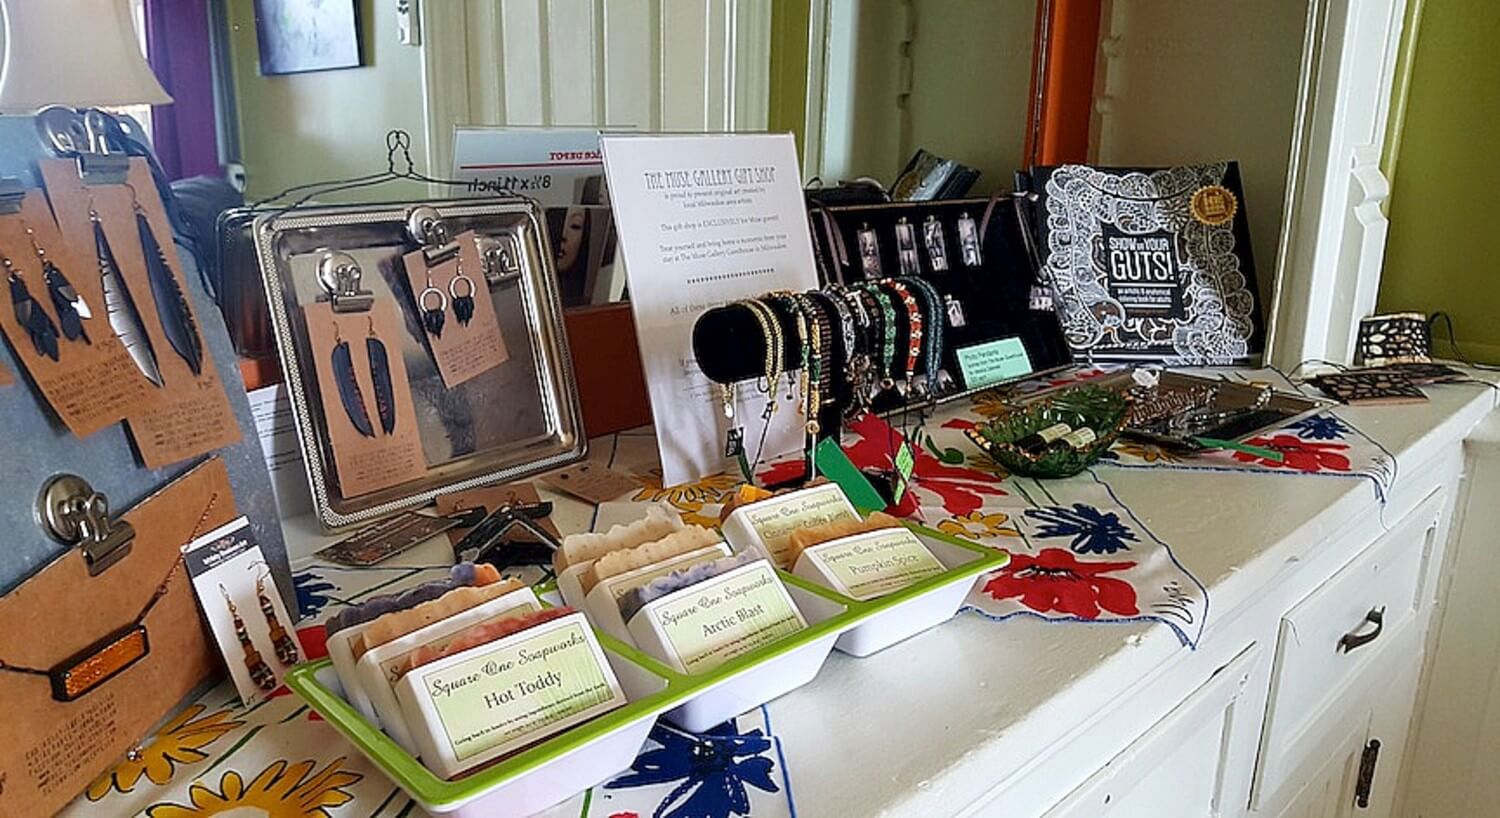 Table of wares for sale including soaps, jewelry and books.